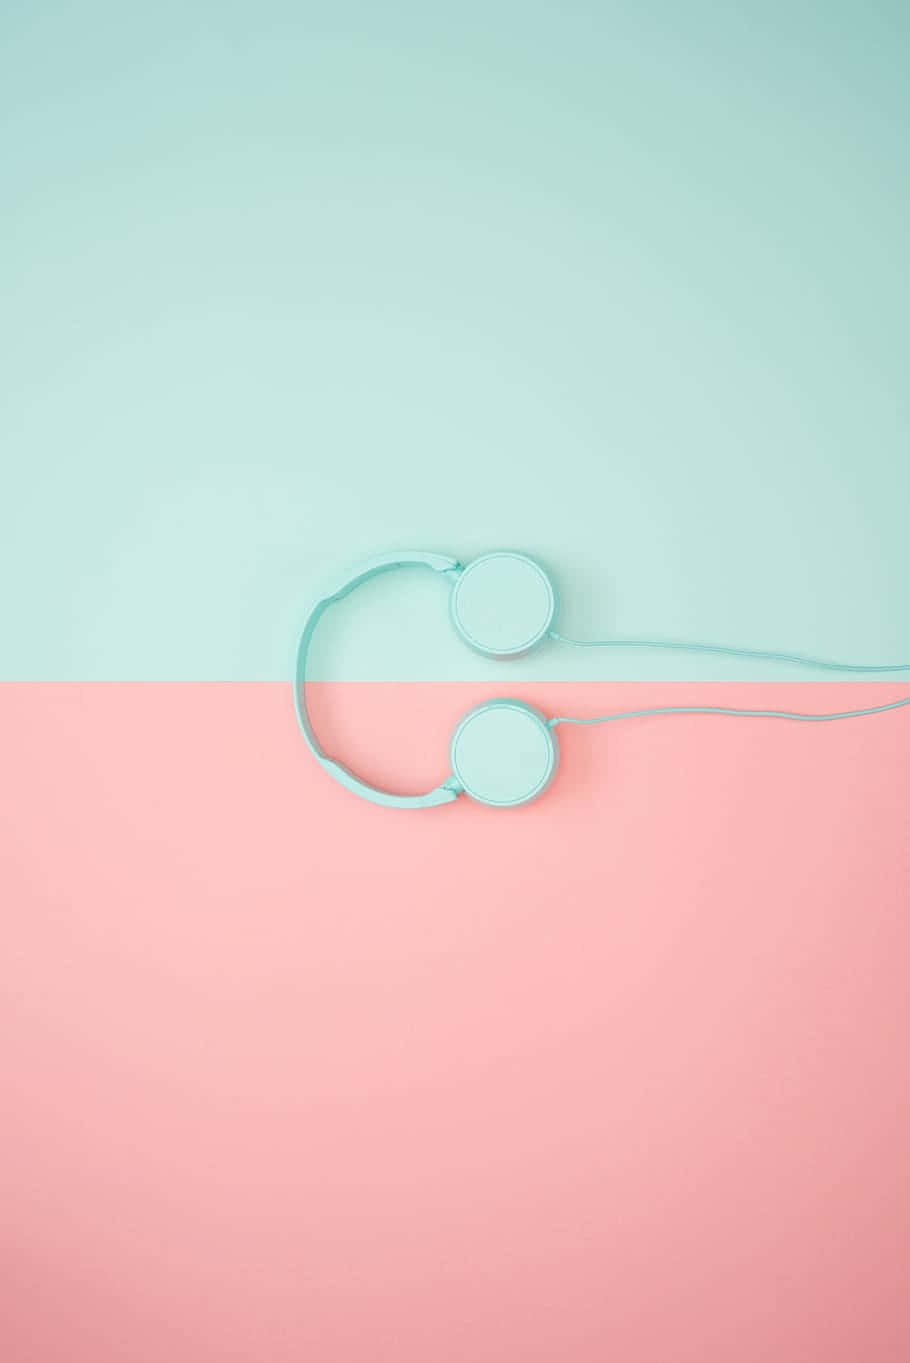 A Soft and Bright Pastel Color Background